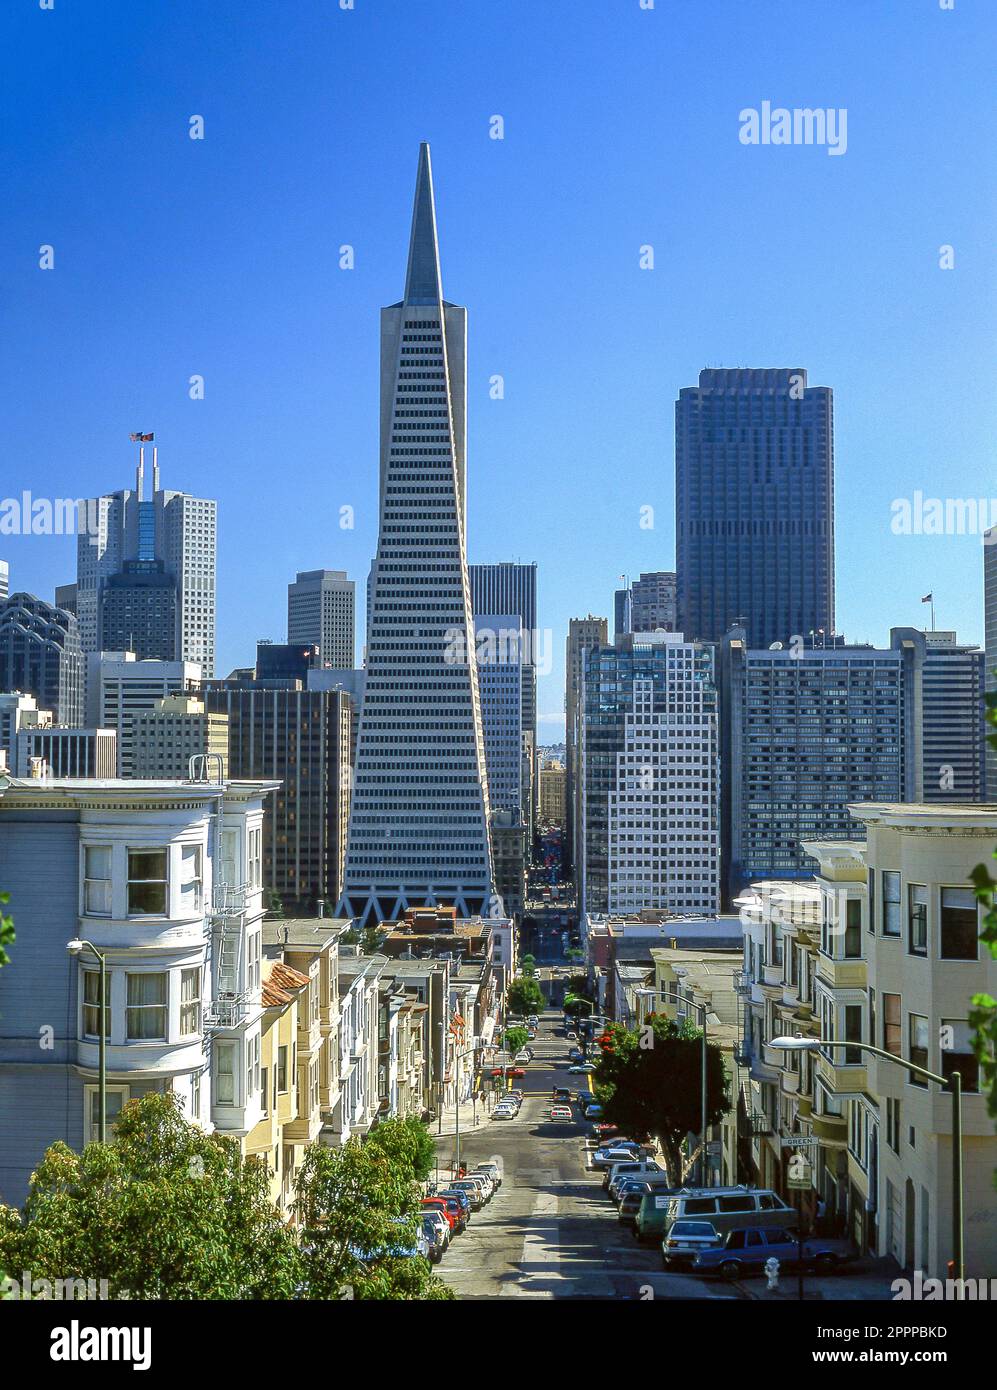 View of downtown business district showing Transamerica Pyramid Building, San Francisco, California, United States of America Stock Photo